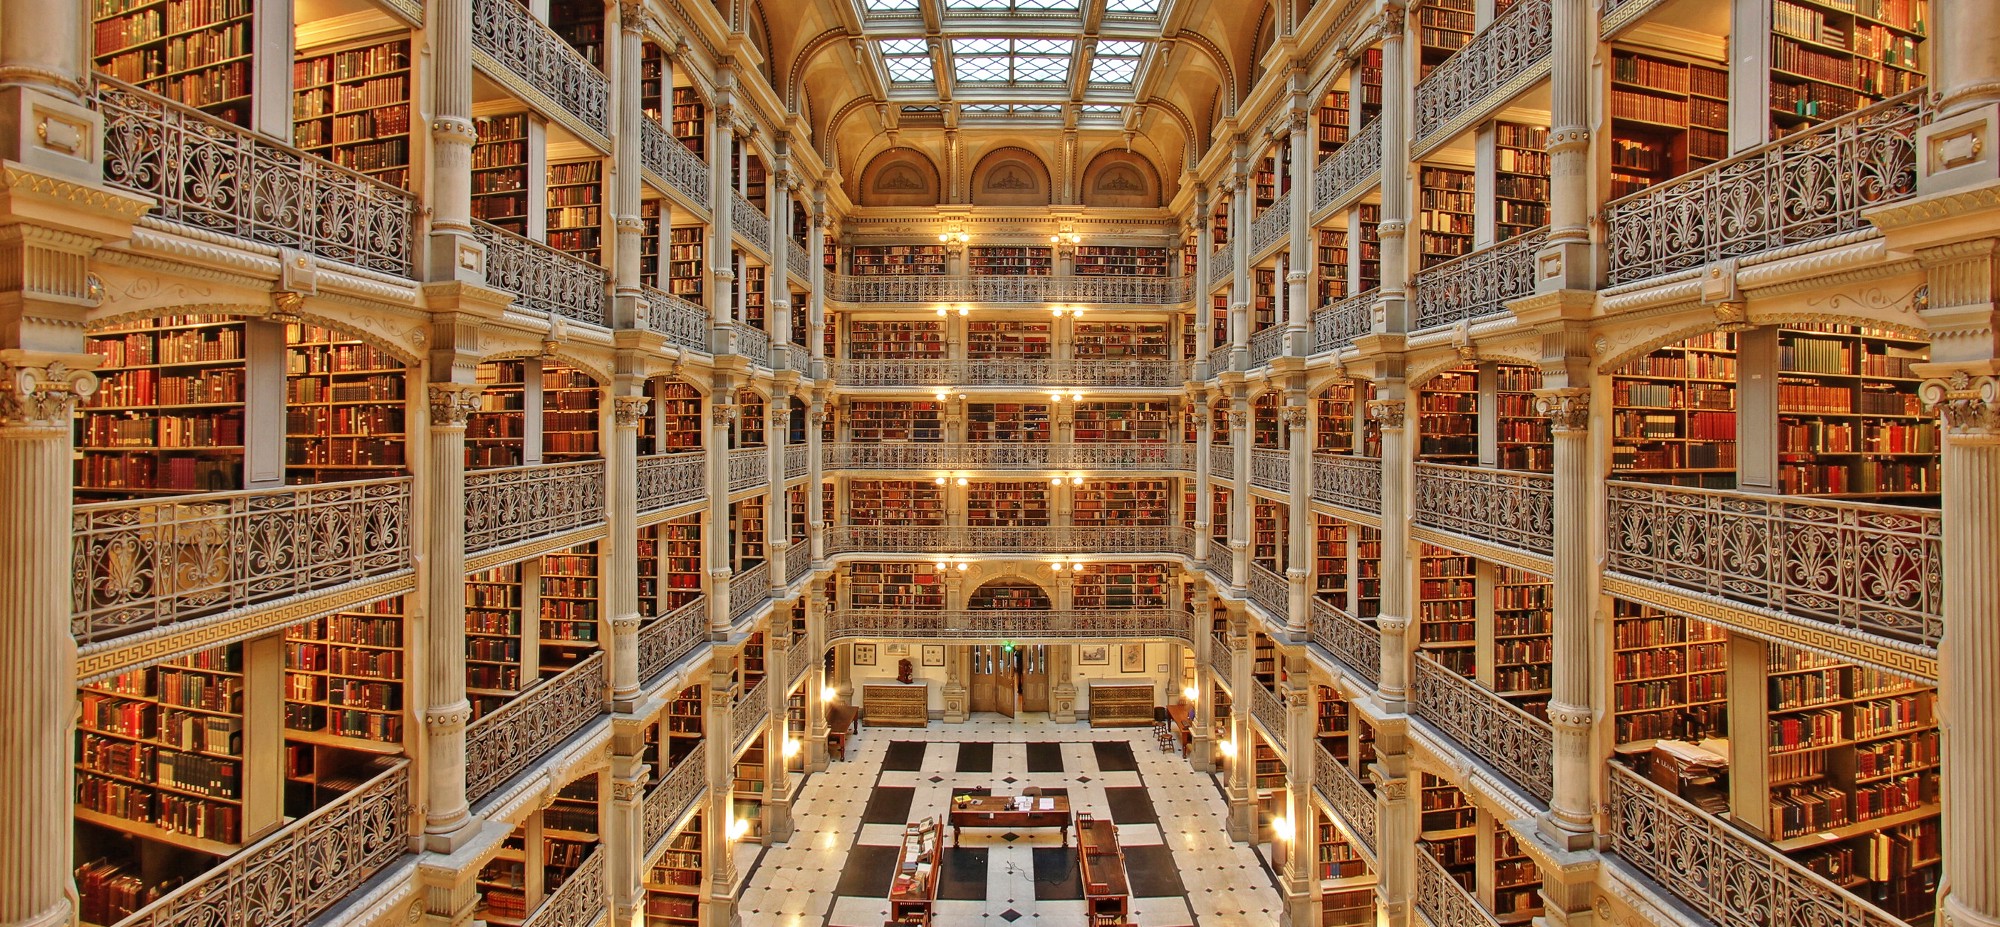 George Peabody Library-Top University Libraries